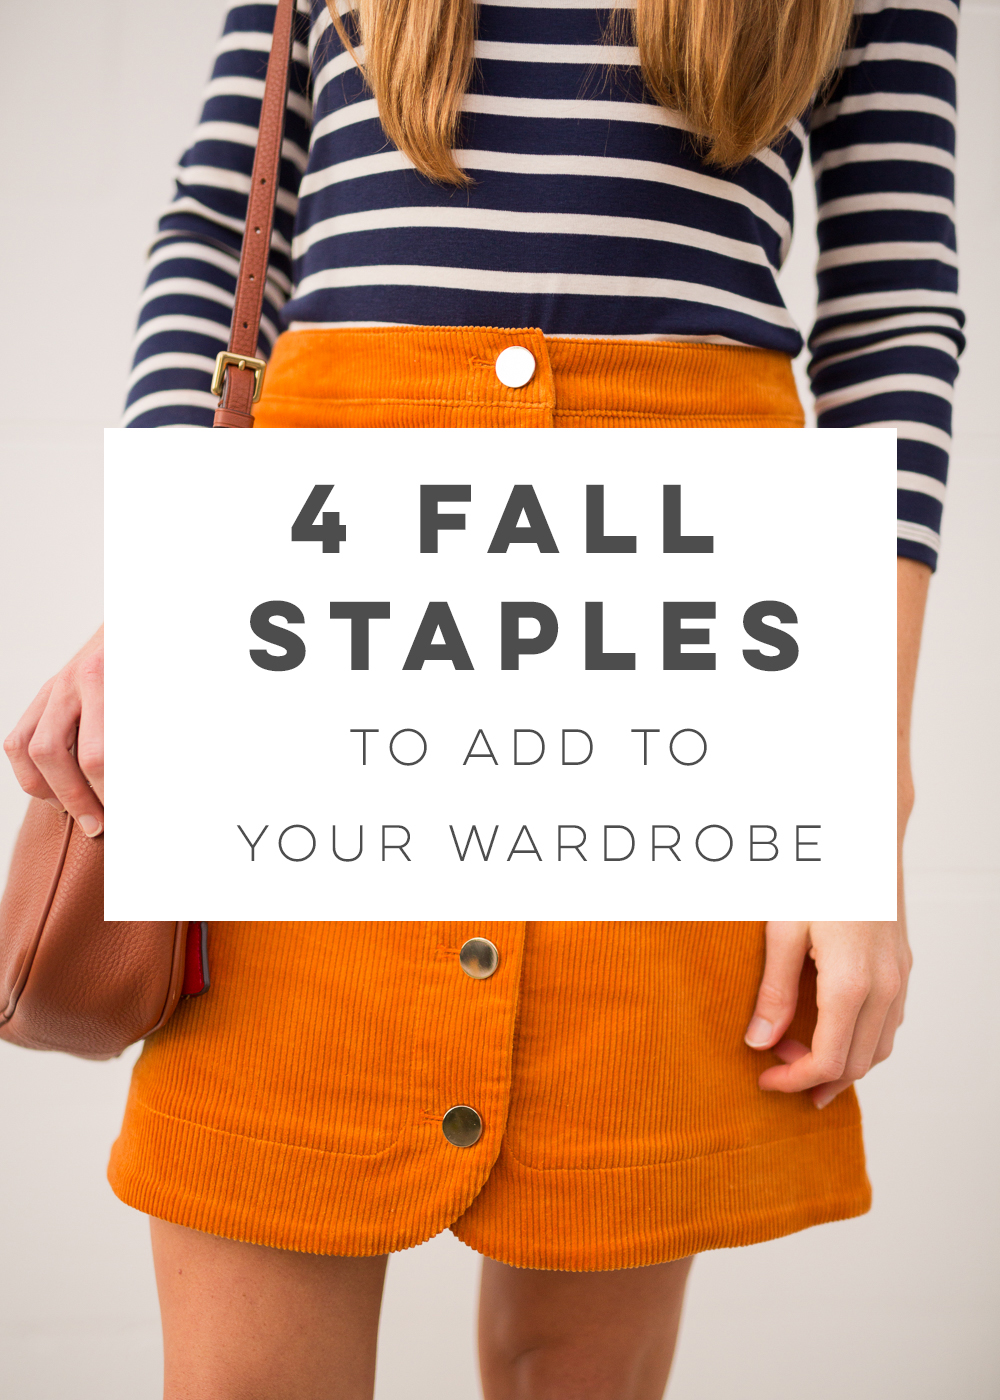 4 Must Have Fall Wardrobe Staples, Striped Top, Button Up Corduroy Skirt, Leather Boots and a Crossbody Leather Bag | Sunshine Style